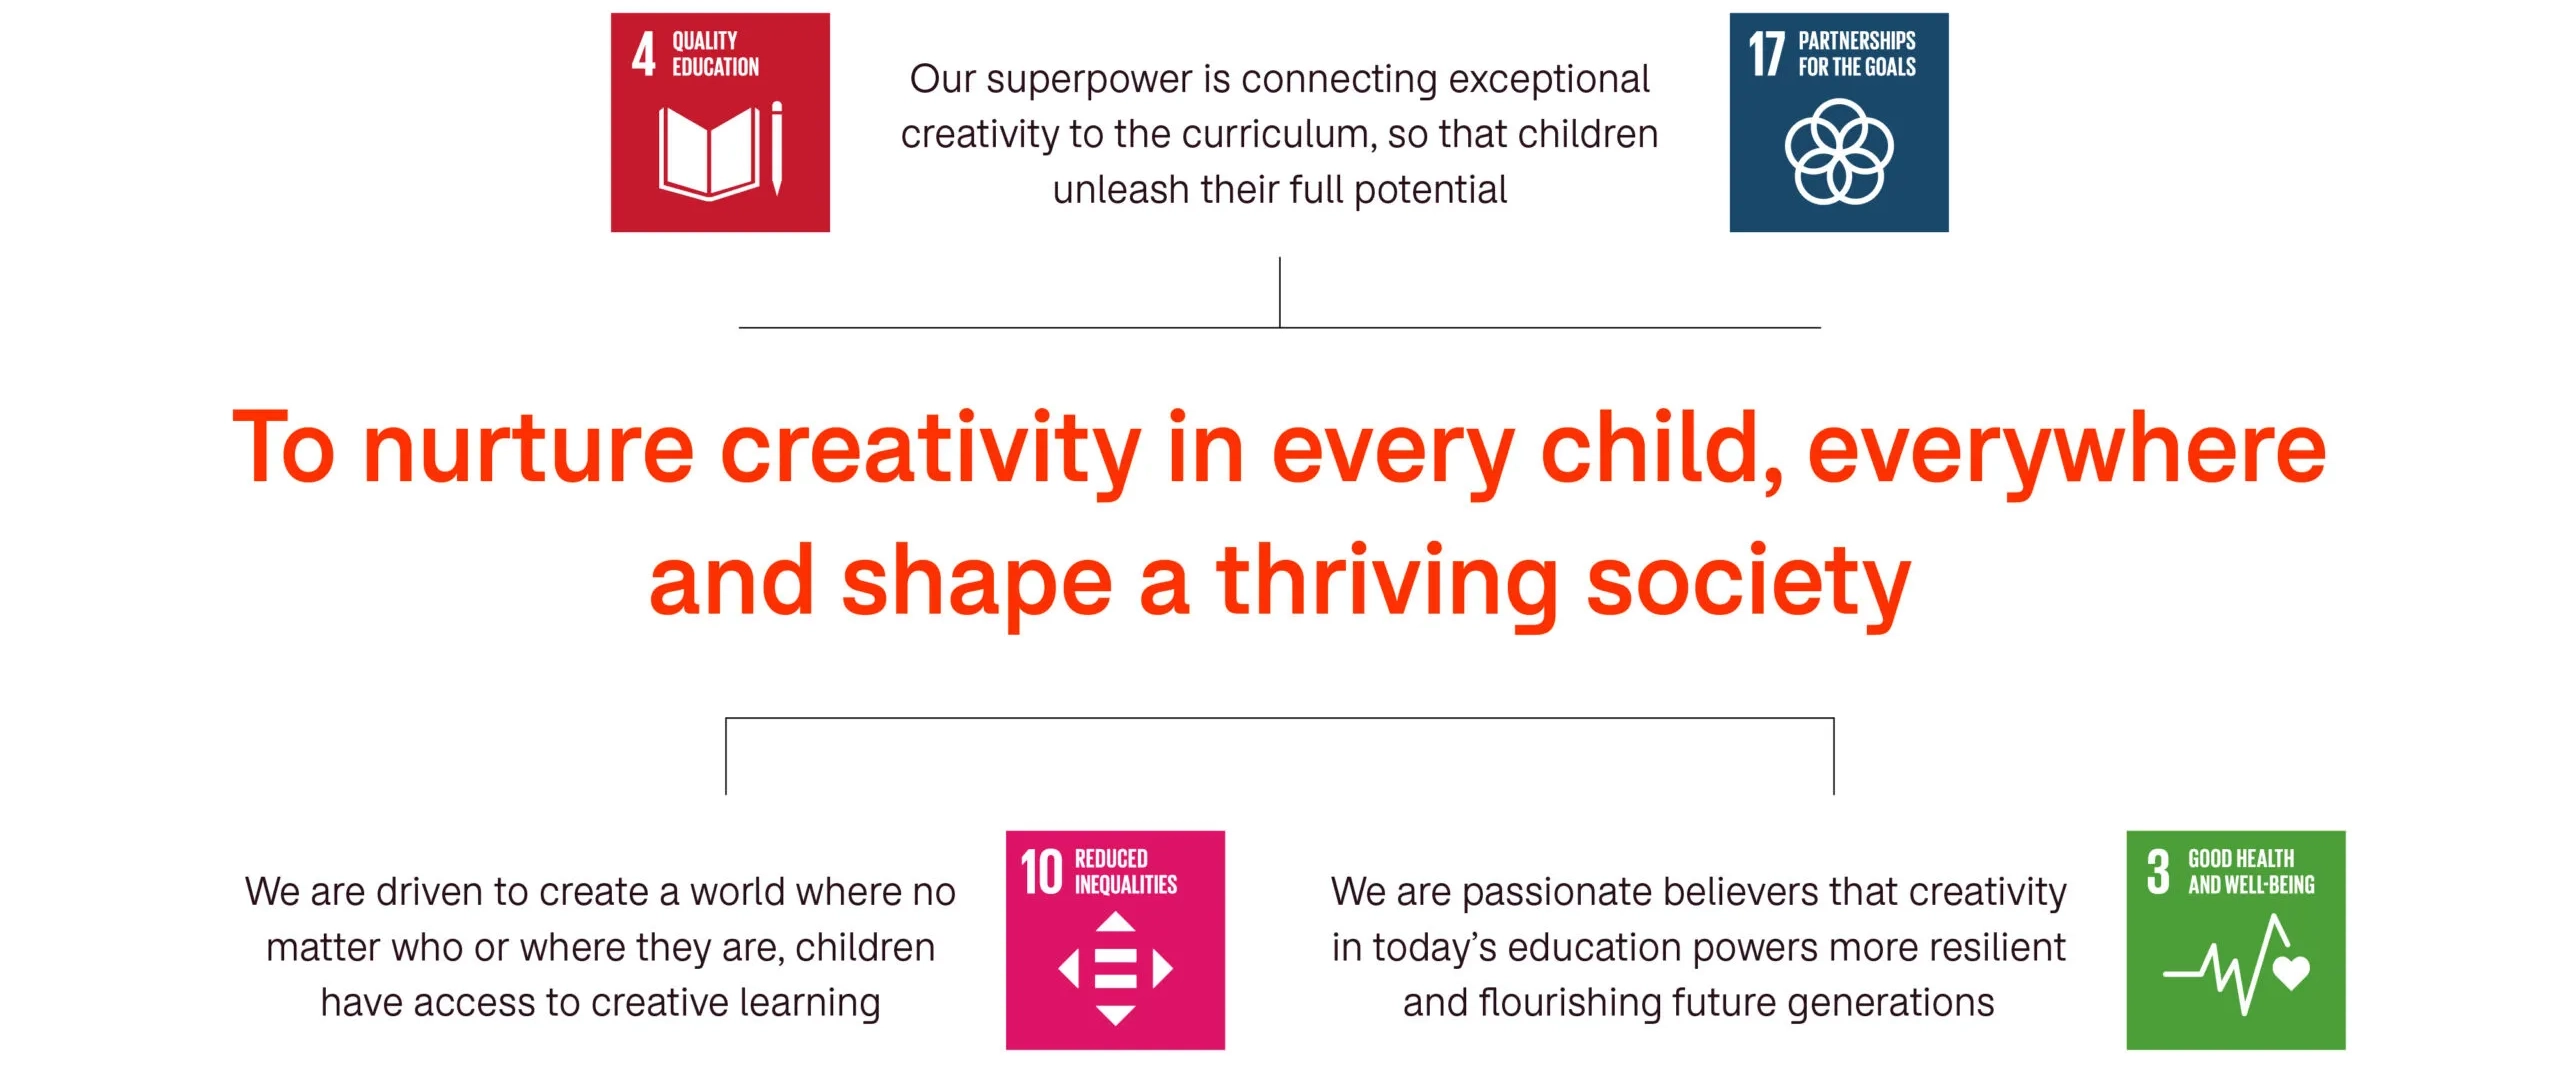 Infographic with the title "To nurture creativity in every child, everywhere and shape a thriving society," emphasizing the importance of quality education, reduced inequalities, good health, and partnerships.